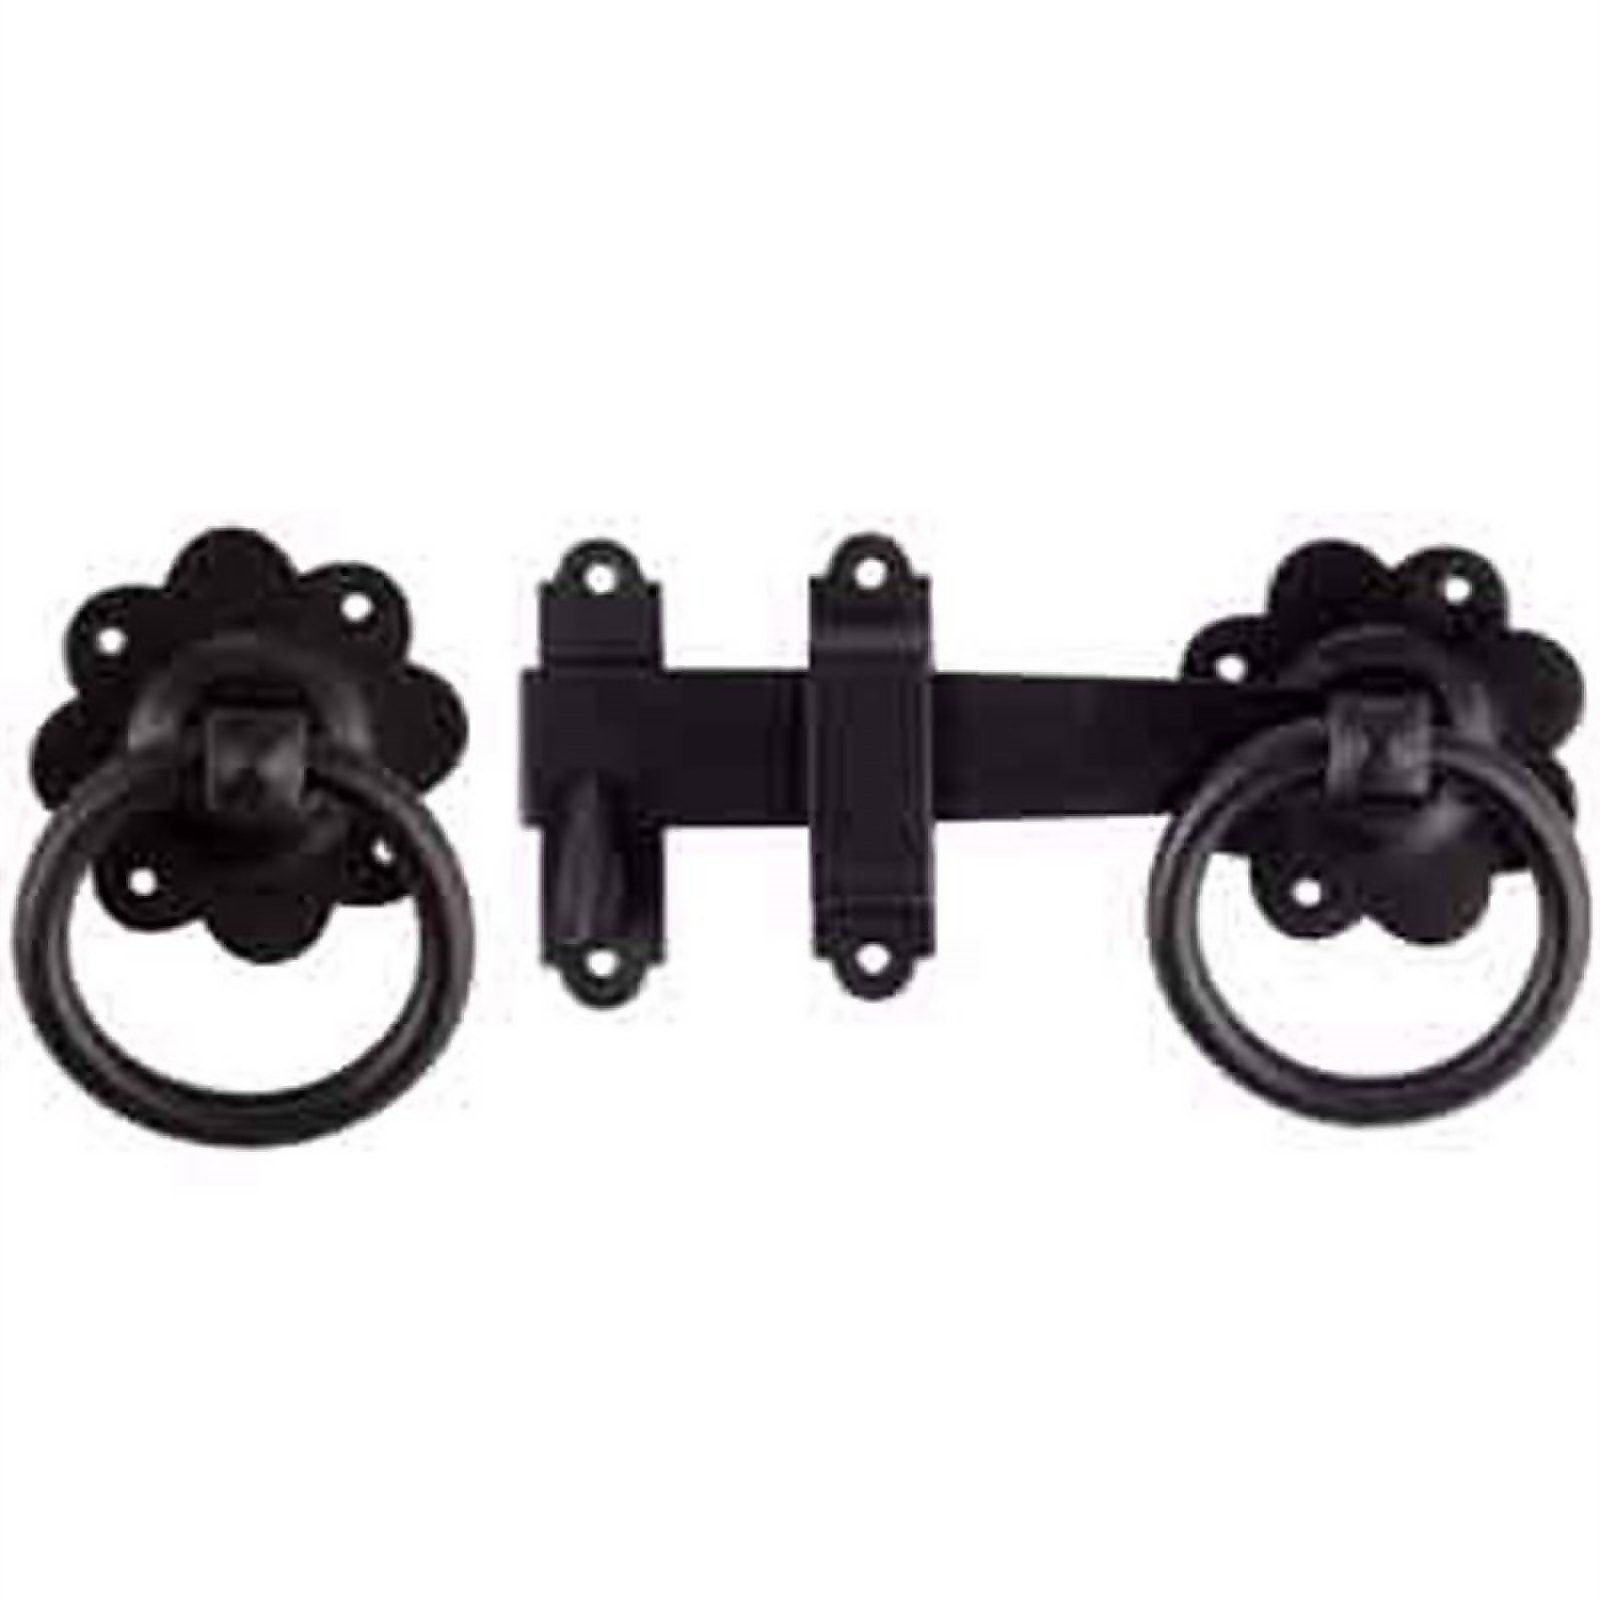 Photo of Ring Handled Gate Latch - Black - 152mm